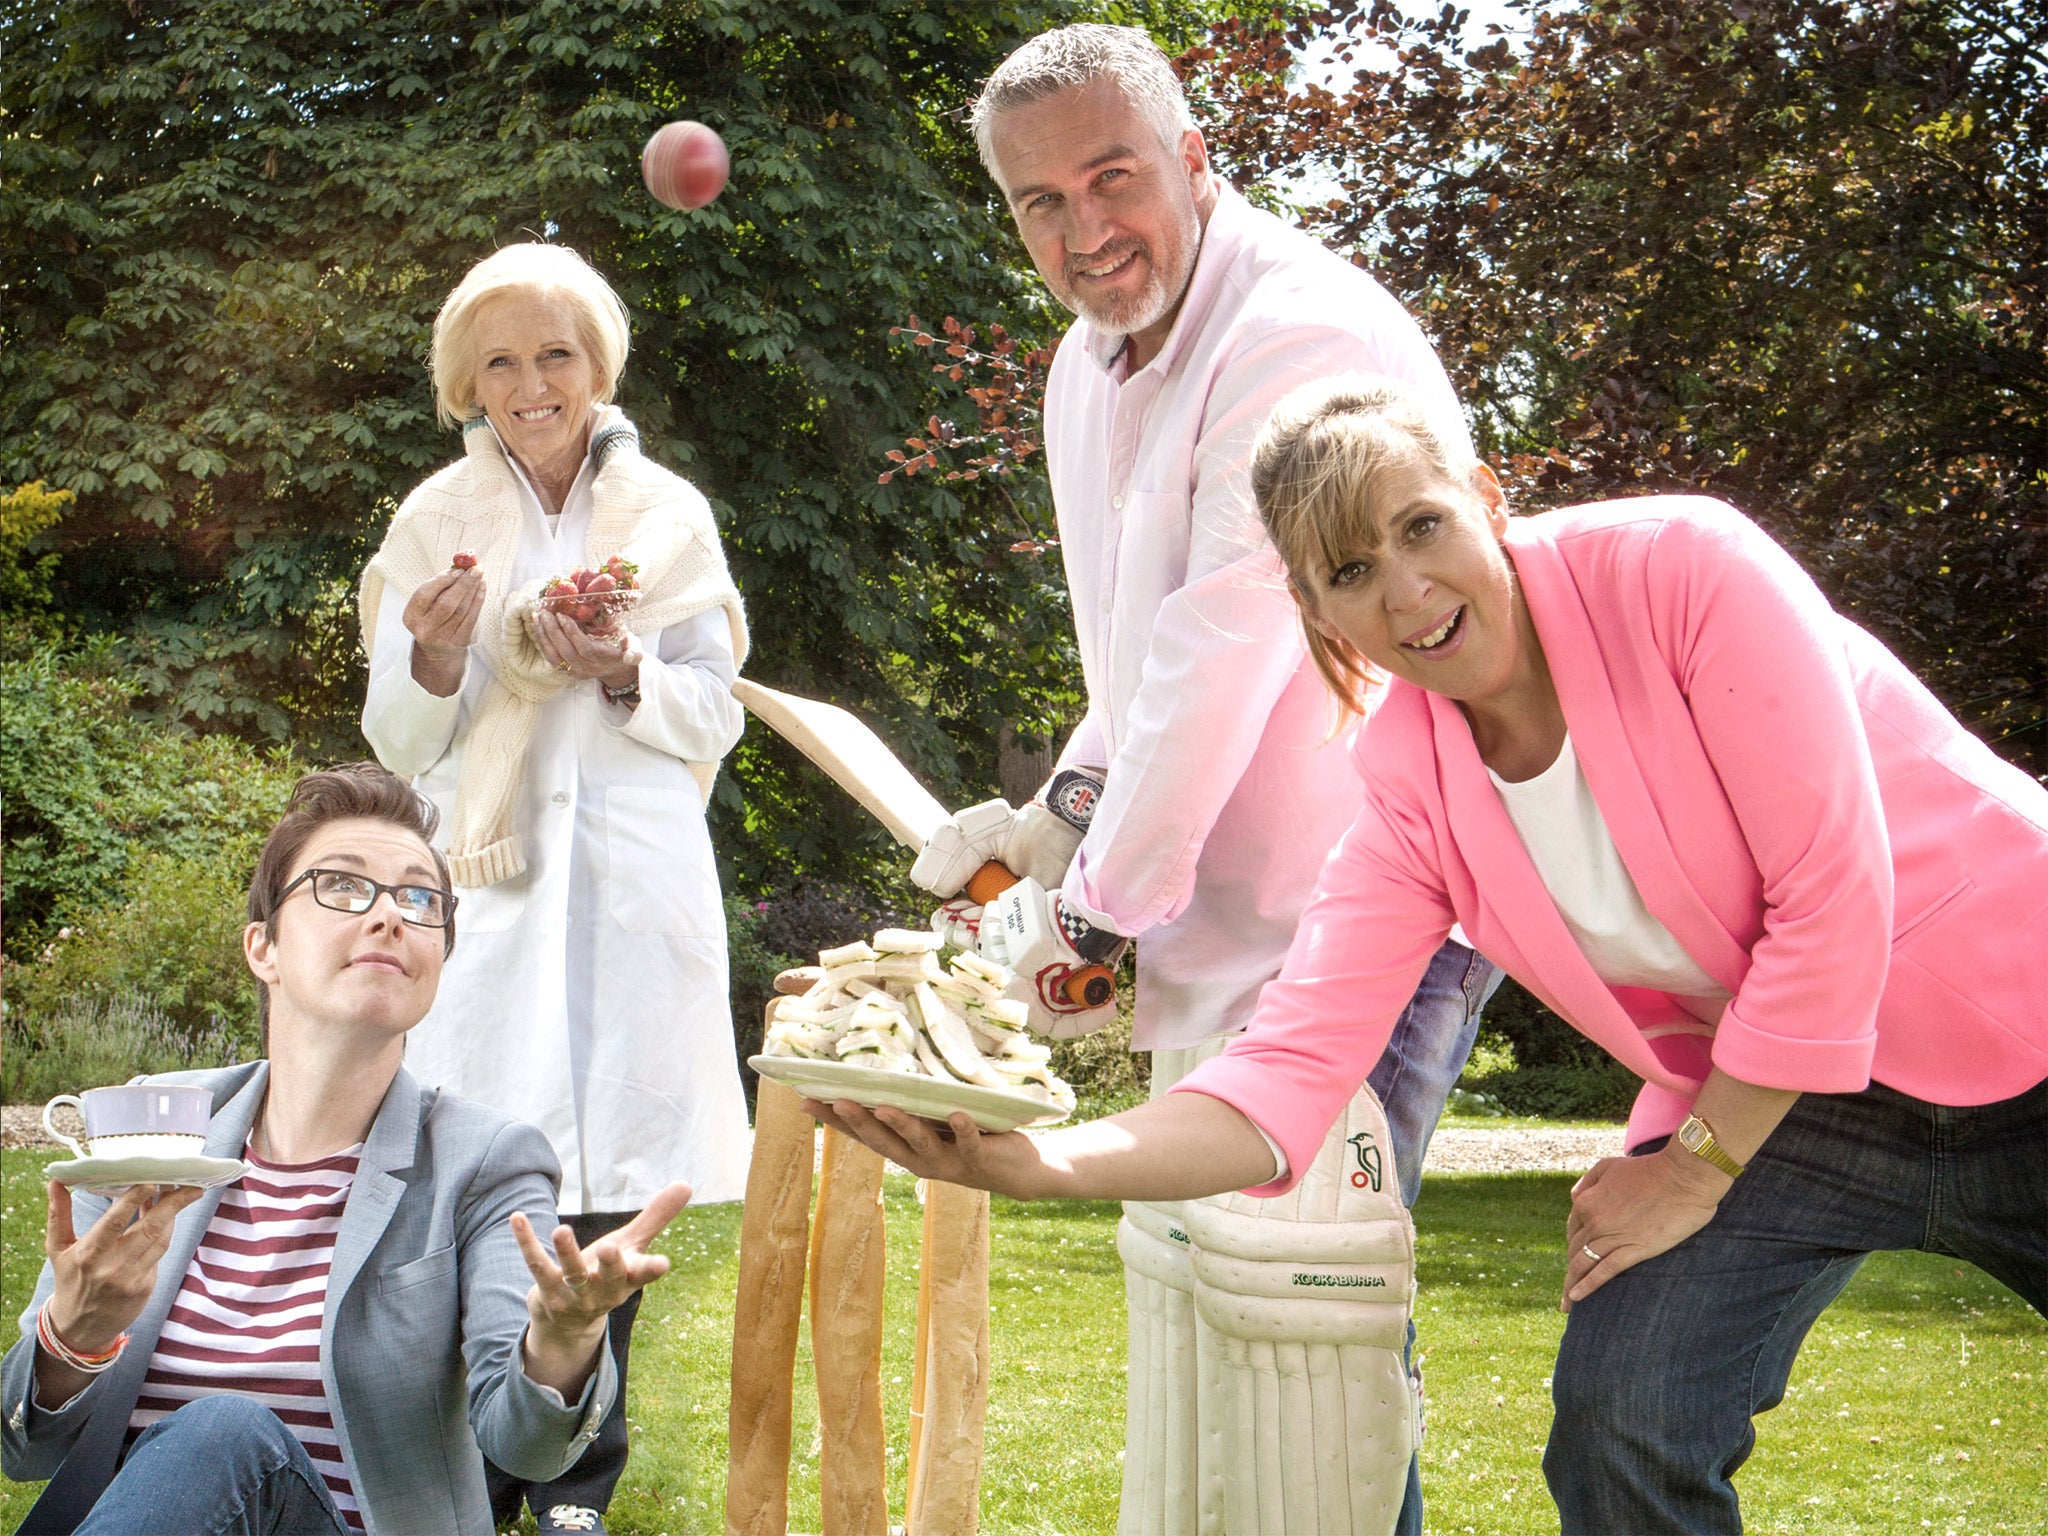 Sue Perkins, Mary Berry, Paul Hollywood and Mel Giedroyc return for more Great British Bake Off